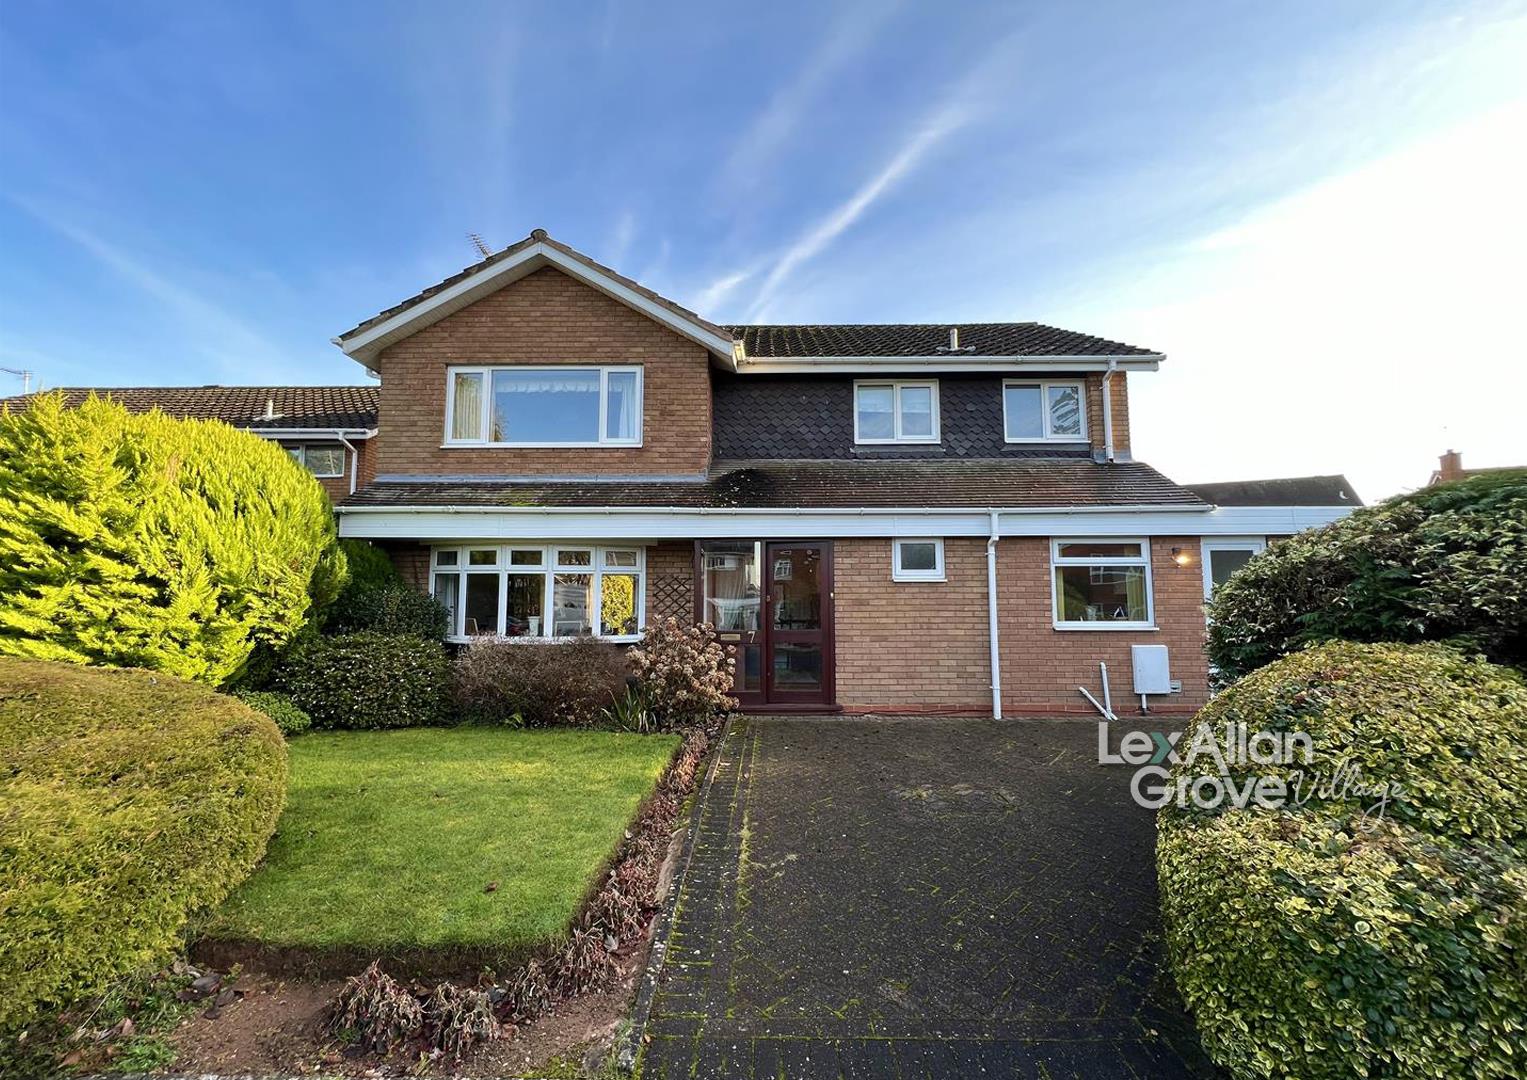 4 bed detached house for sale in Orchard Close, Stourbridge - Property Image 1